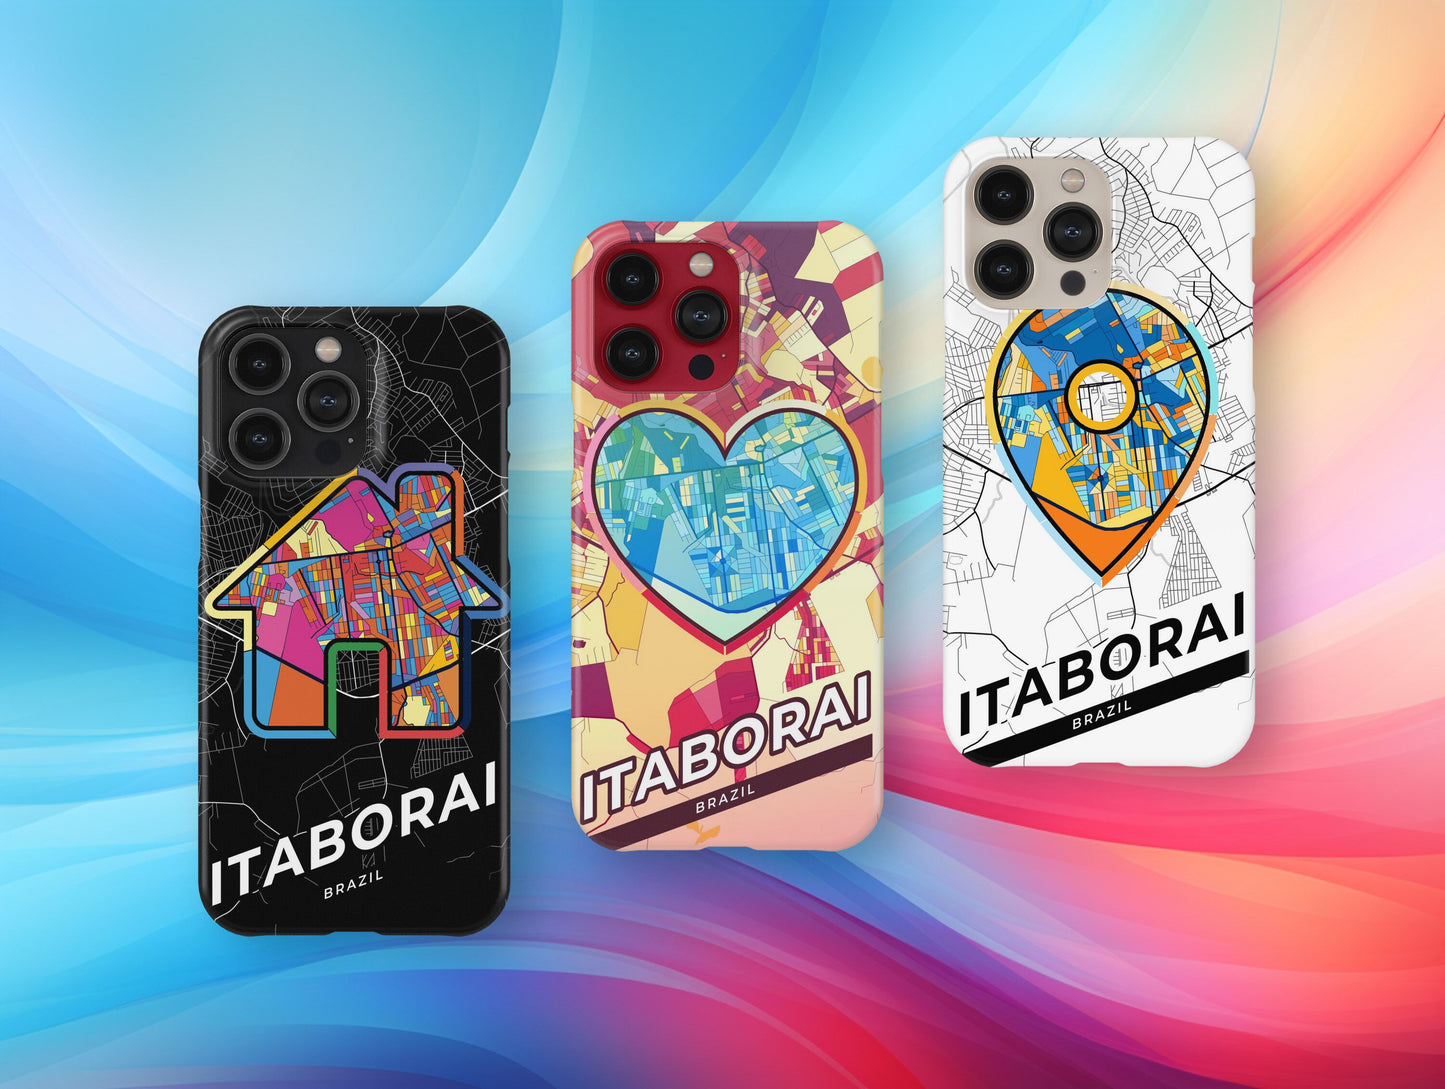 Itaborai Brazil slim phone case with colorful icon. Birthday, wedding or housewarming gift. Couple match cases.